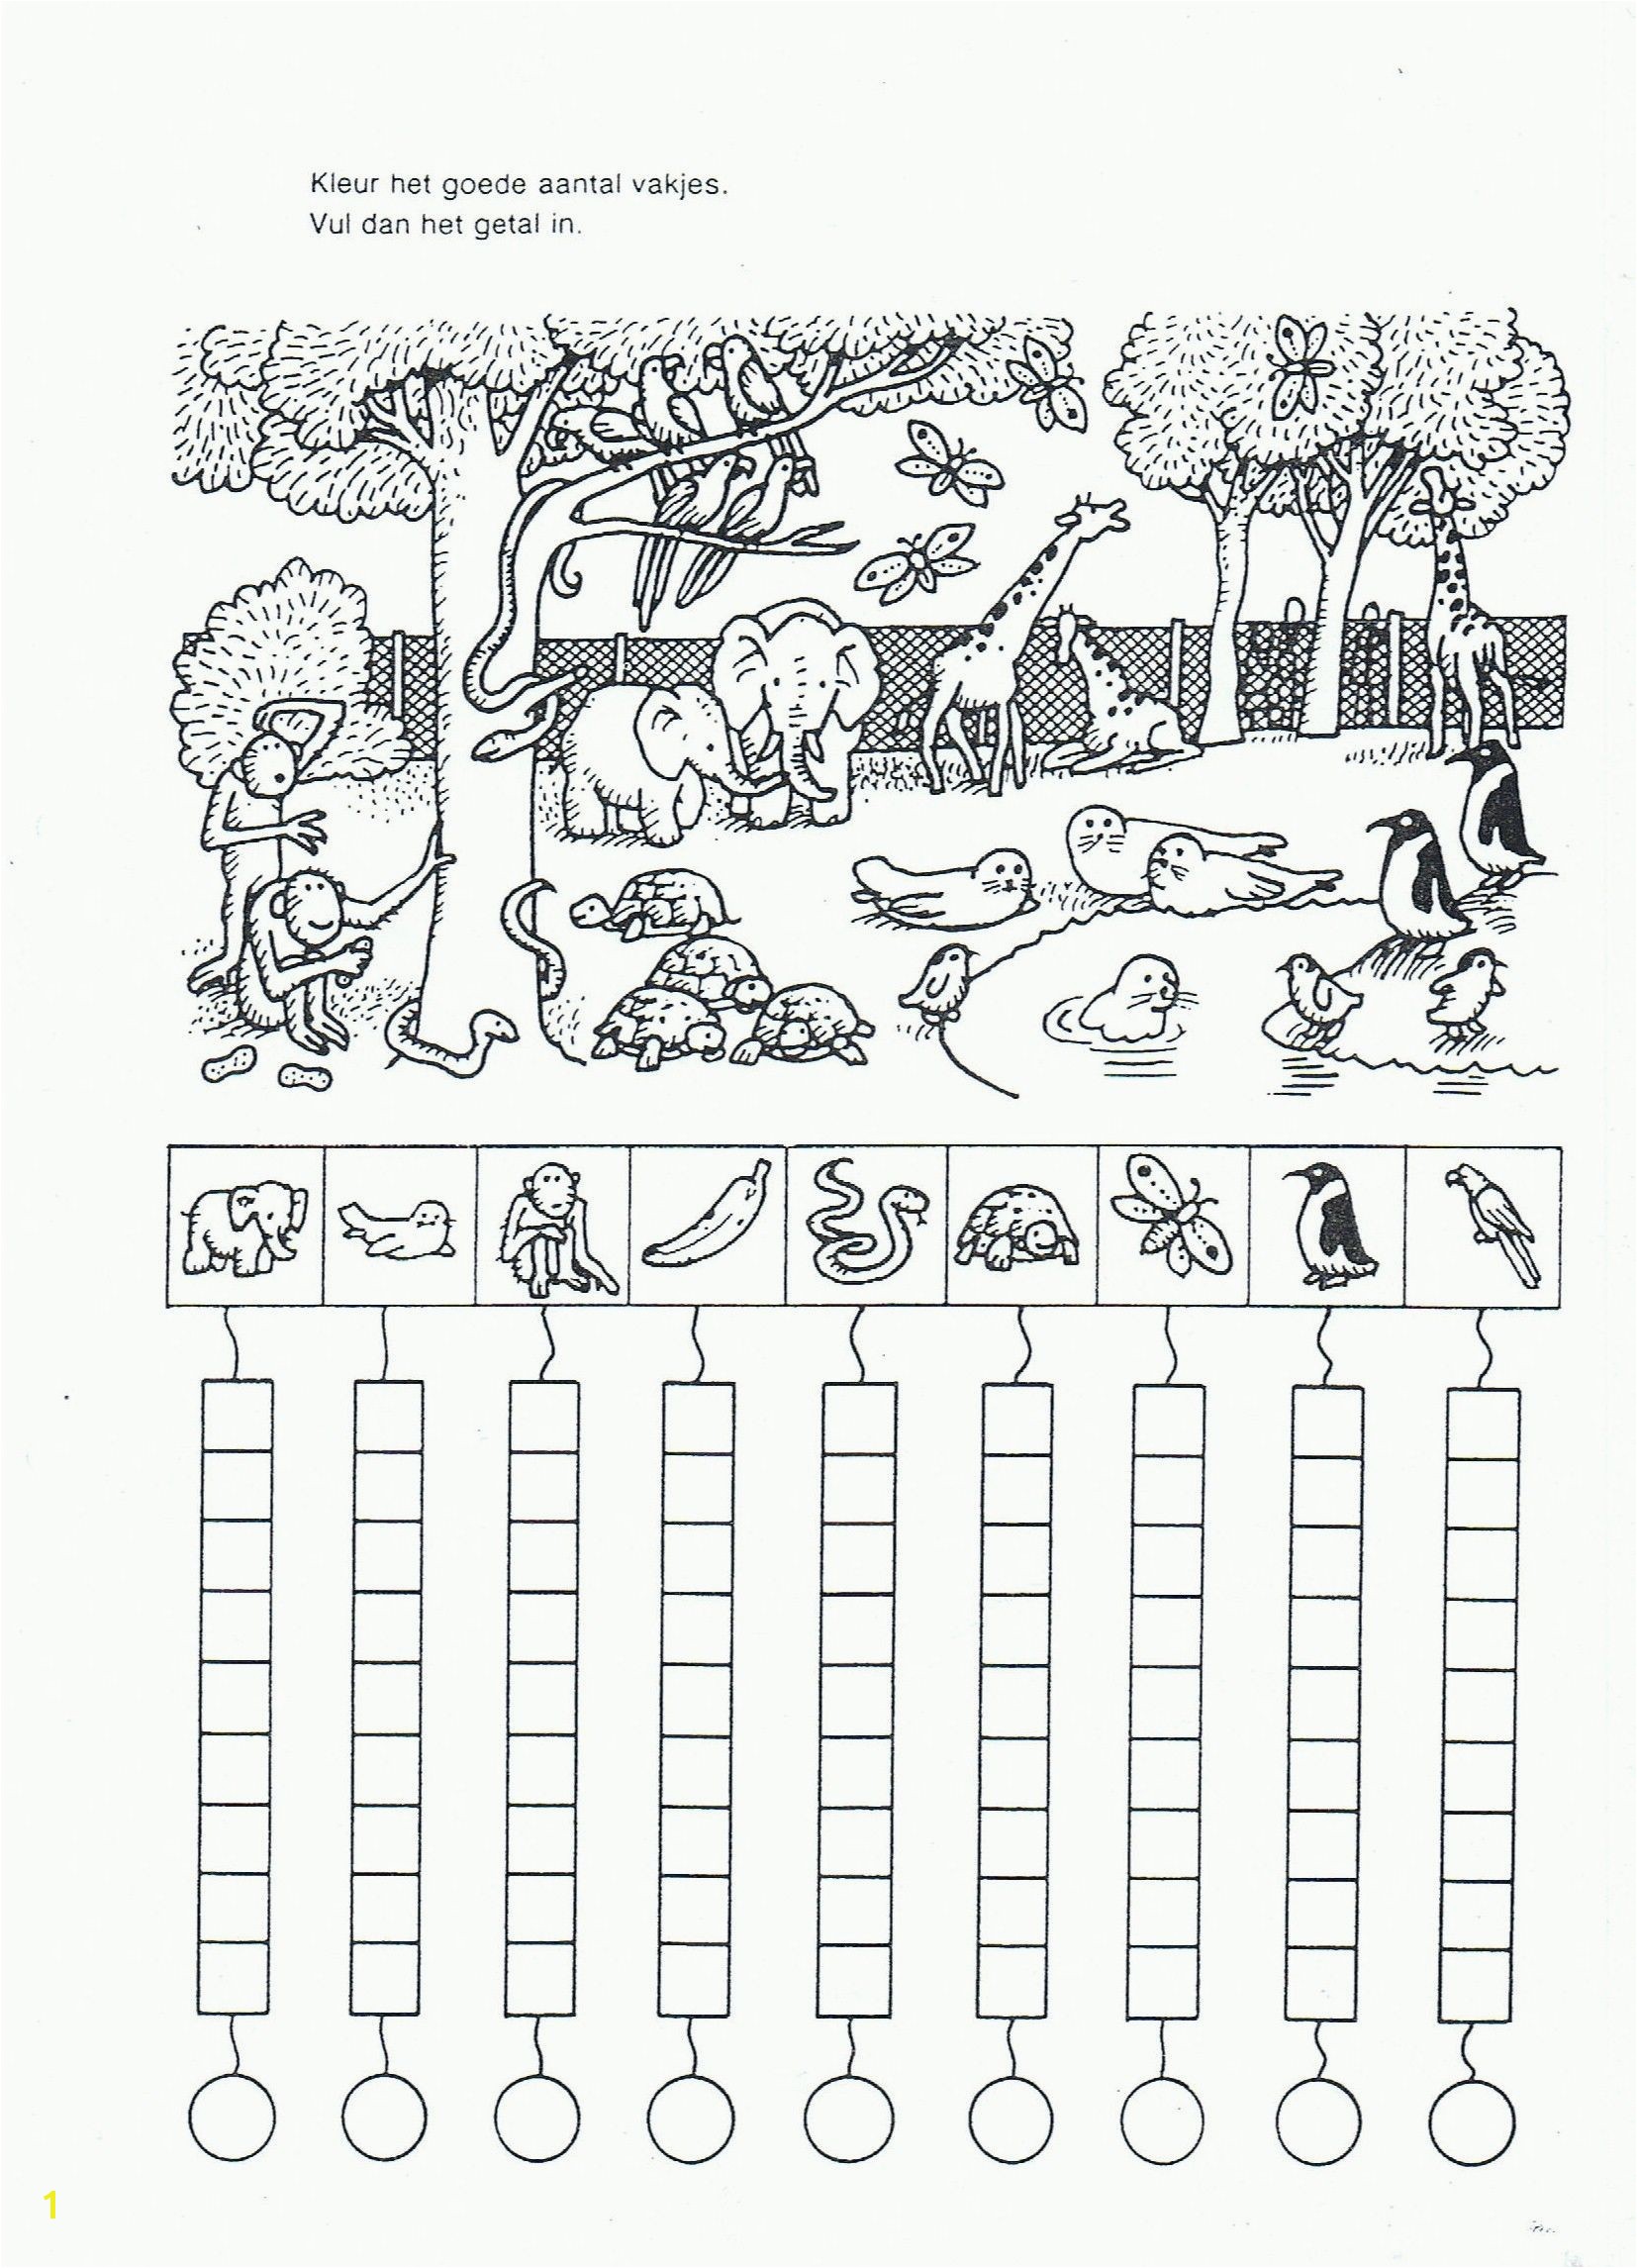 Adding and Subtracting Coloring Pages Elegant Math Coloring Sheets for Spring Addition and Subtraction to 20